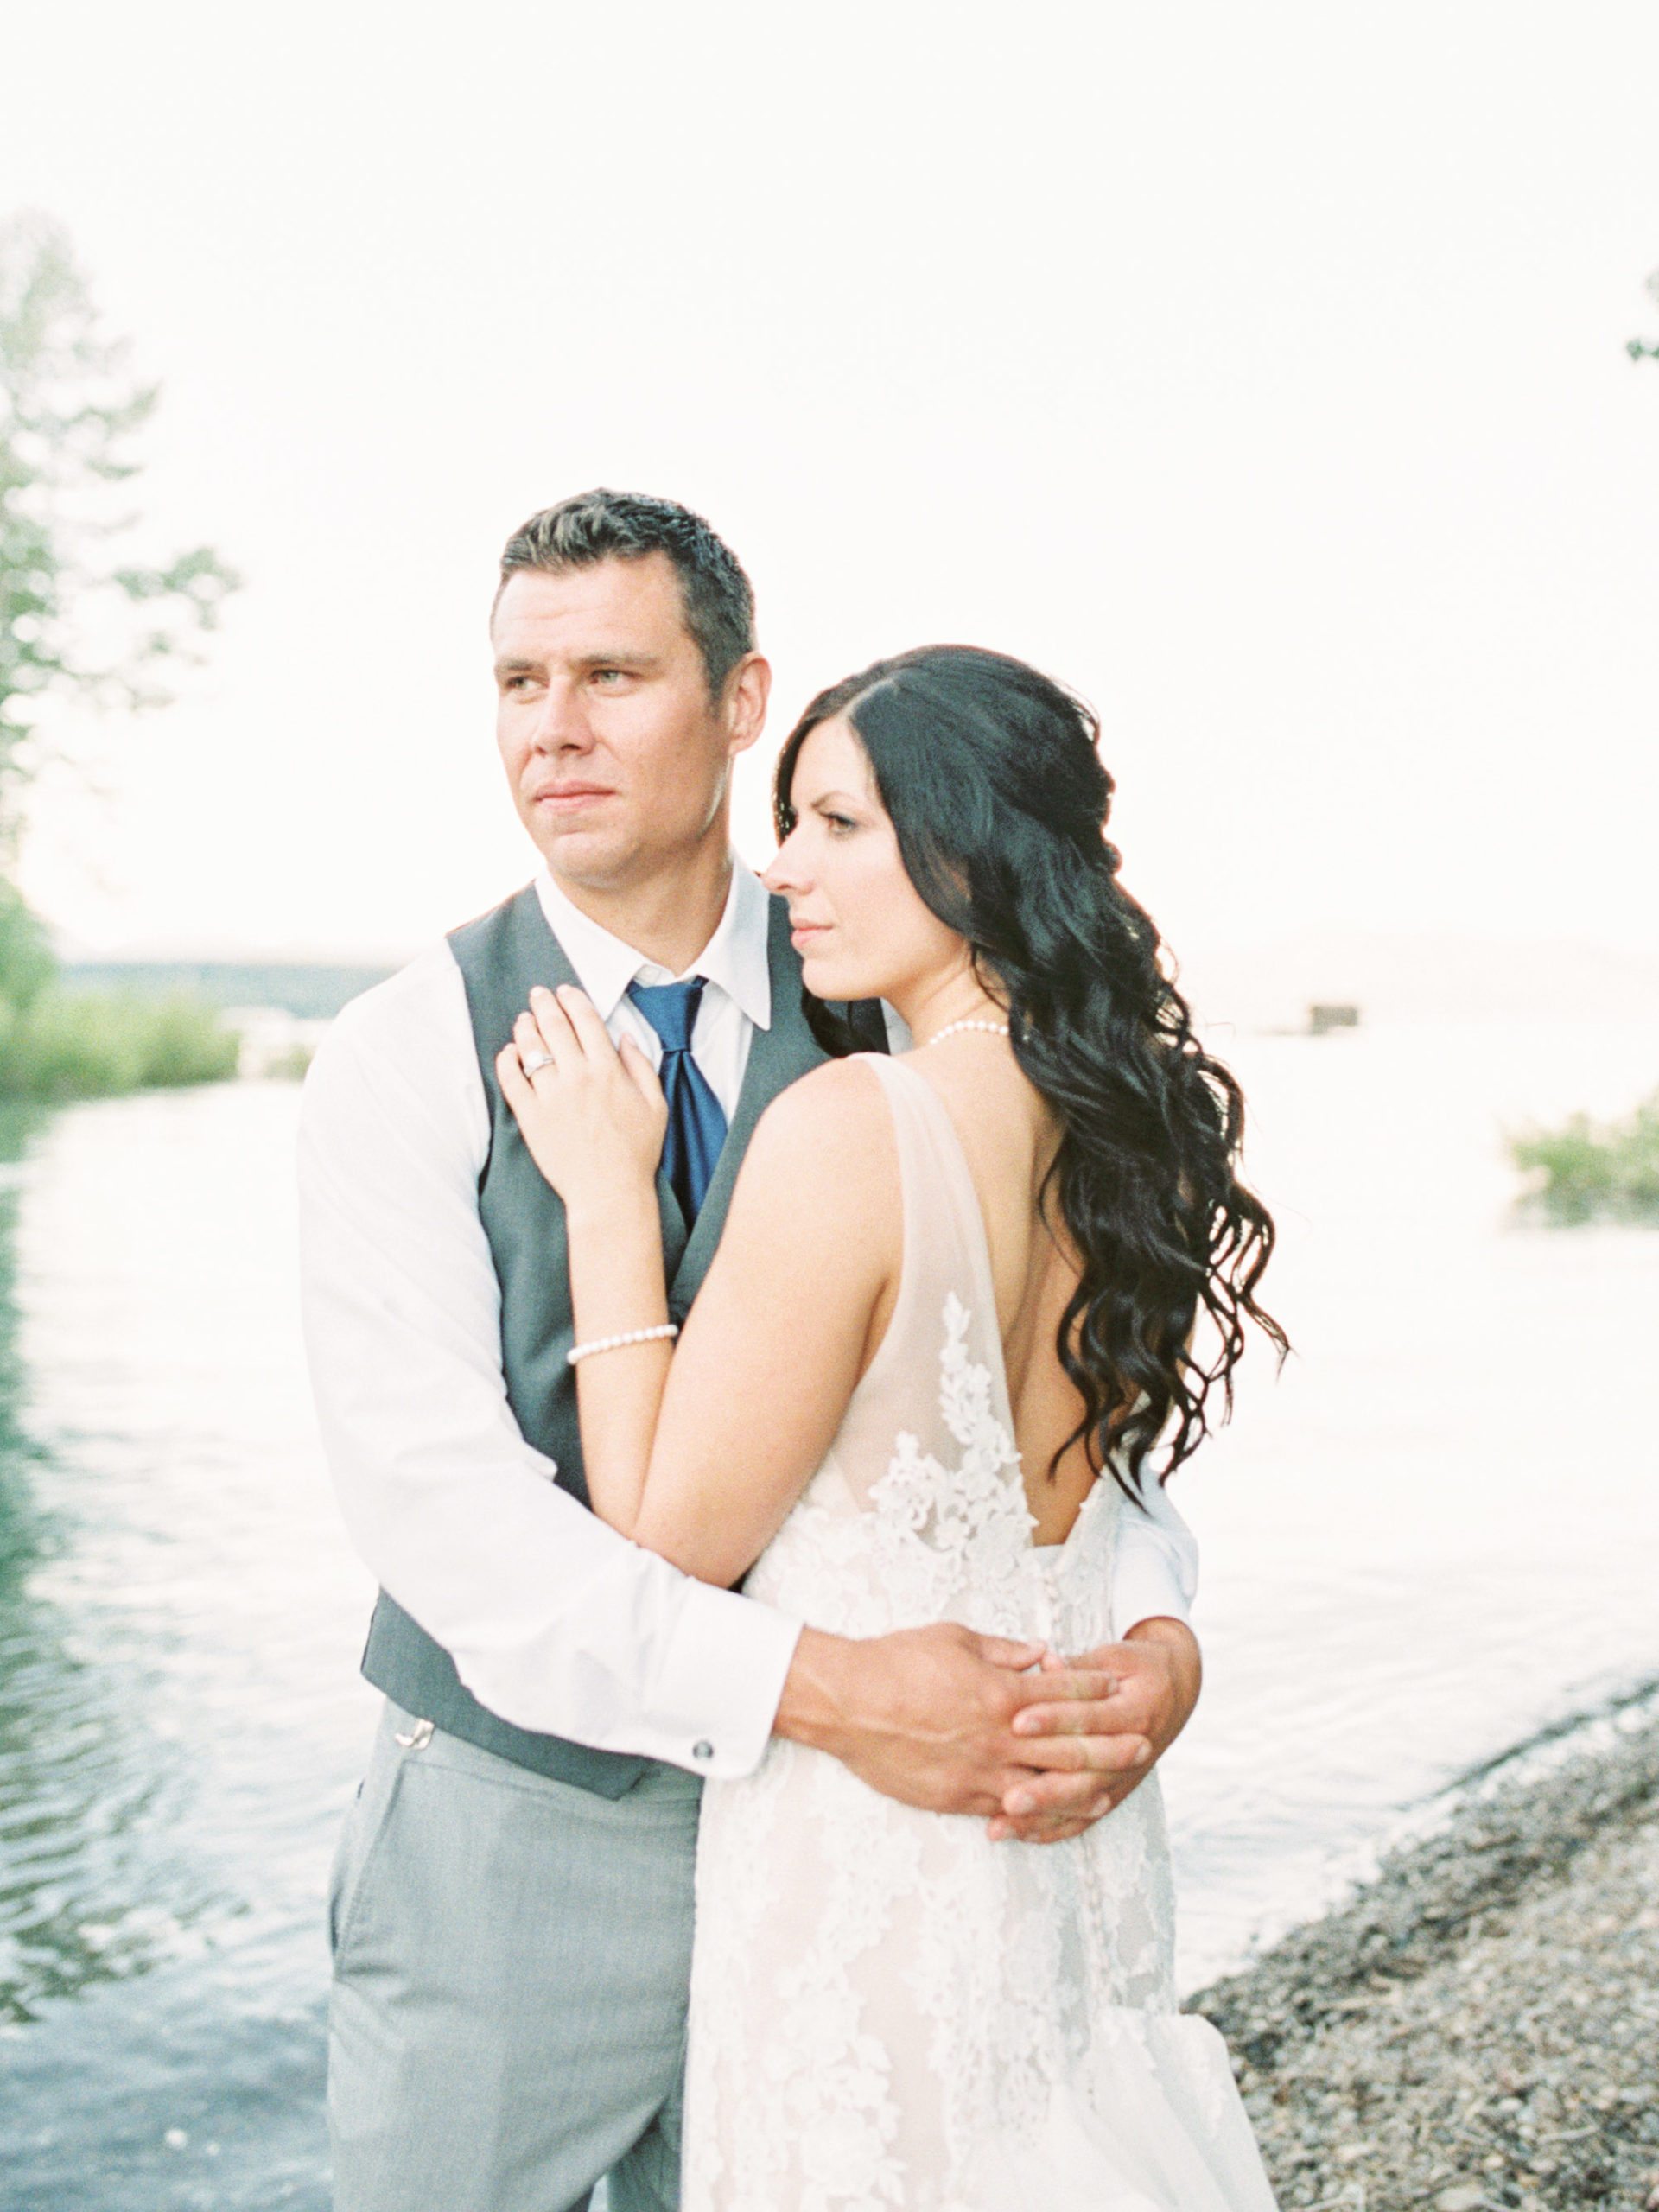 Wedding Photos of bride and groom at sunset | Gatekeepers Museum In Lake Tahoe | Shot on film by light and airy Lake Tahoe Wedding Photographer, Mandy Ford.